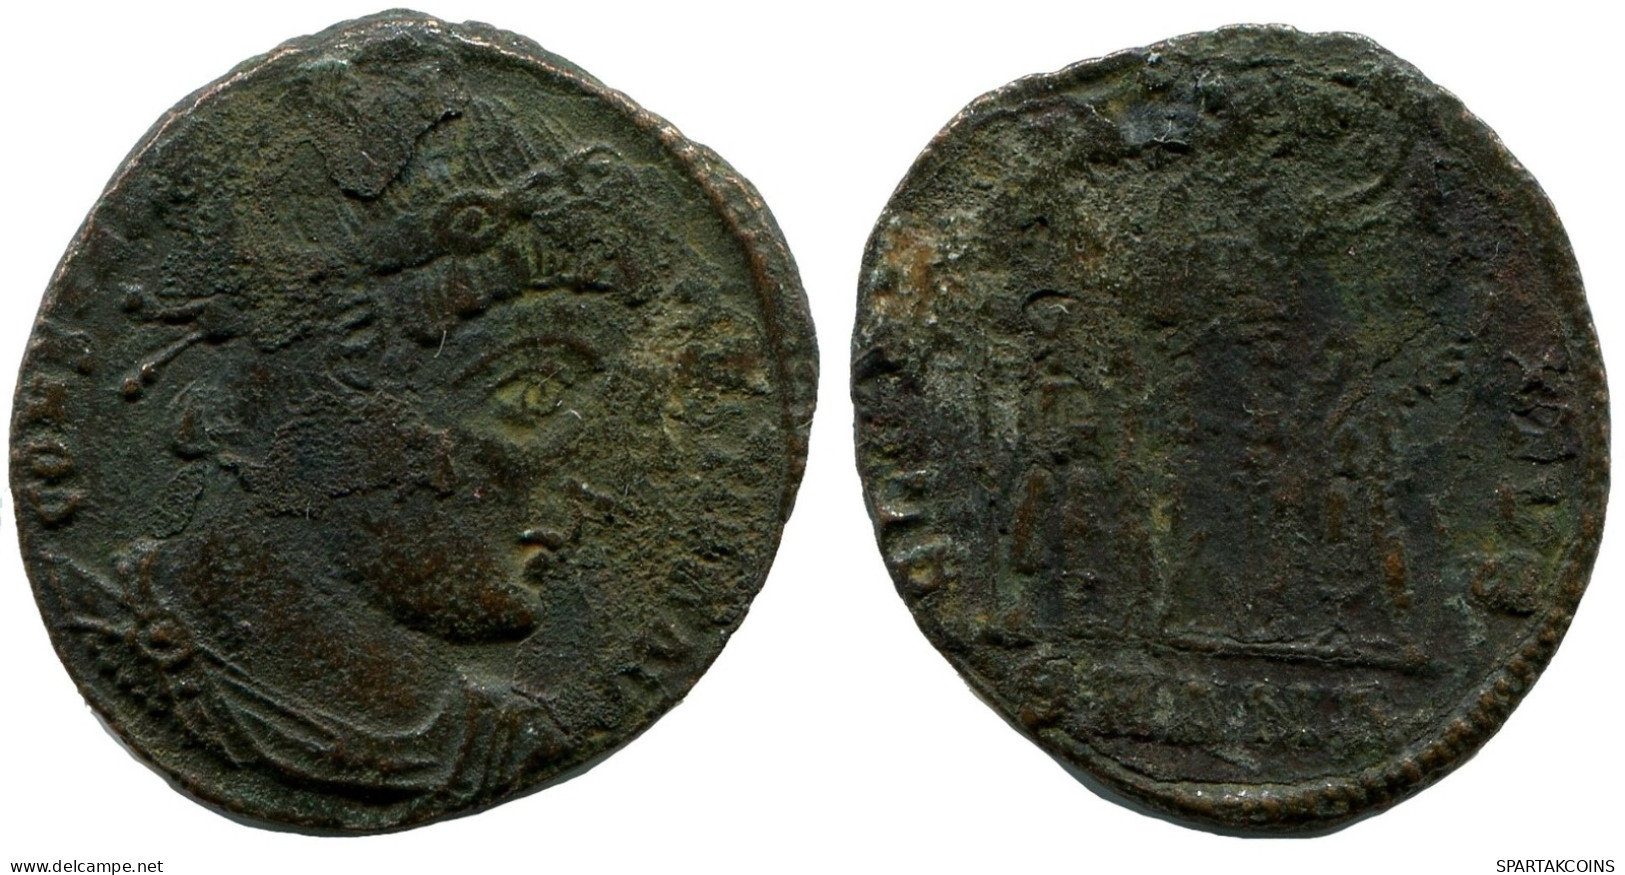 CONSTANTINE I MINTED IN ANTIOCH FOUND IN IHNASYAH HOARD EGYPT #ANC10590.14.E.A - El Impero Christiano (307 / 363)